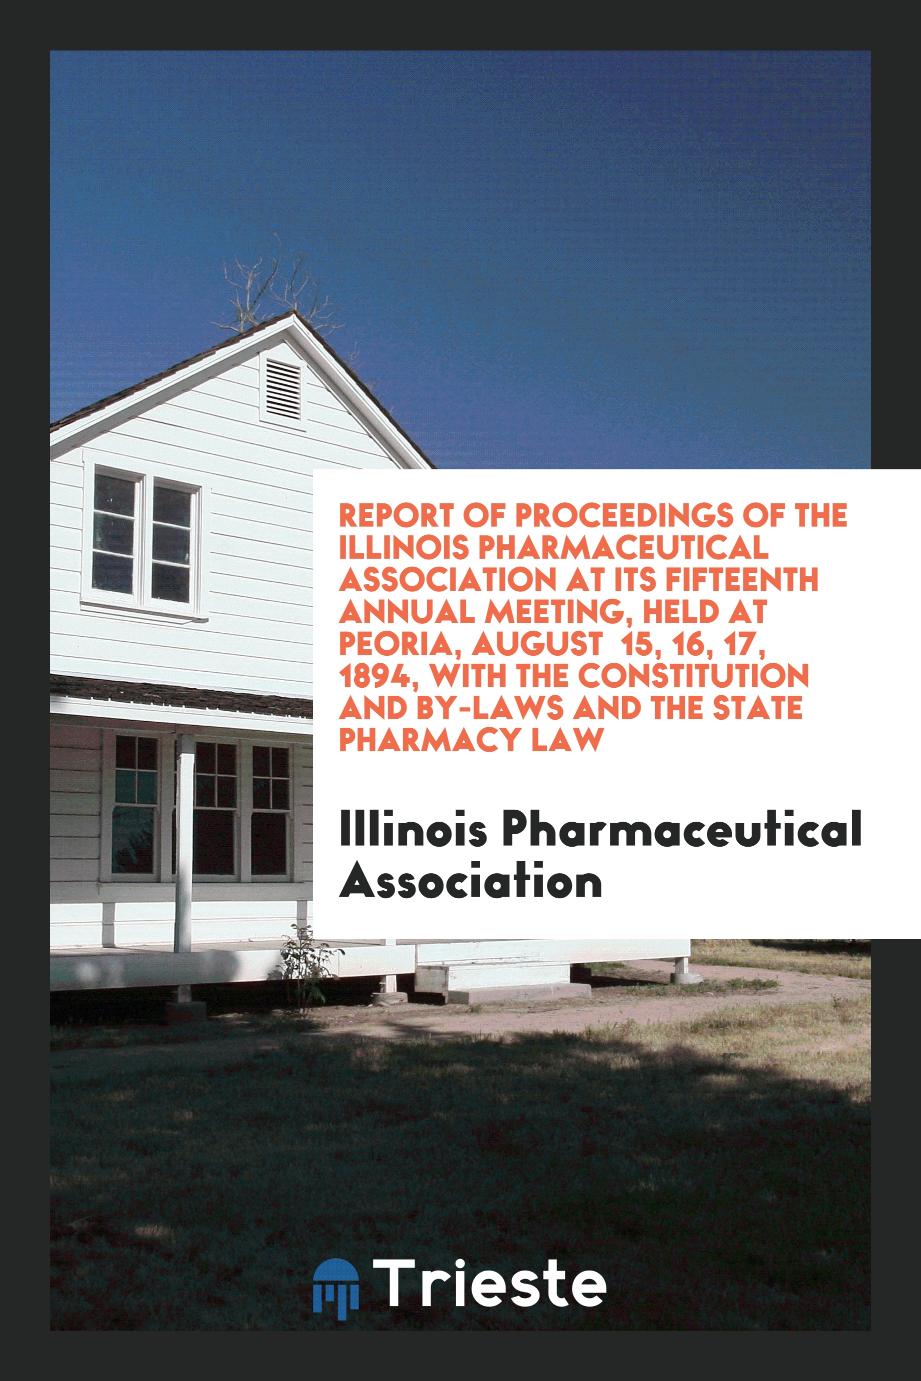 Report of Proceedings of the Illinois Pharmaceutical Association at Its Fifteenth Annual Meeting, Held at Peoria, August 15, 16, 17, 1894, with the Constitution and By-Laws and the State Pharmacy Law